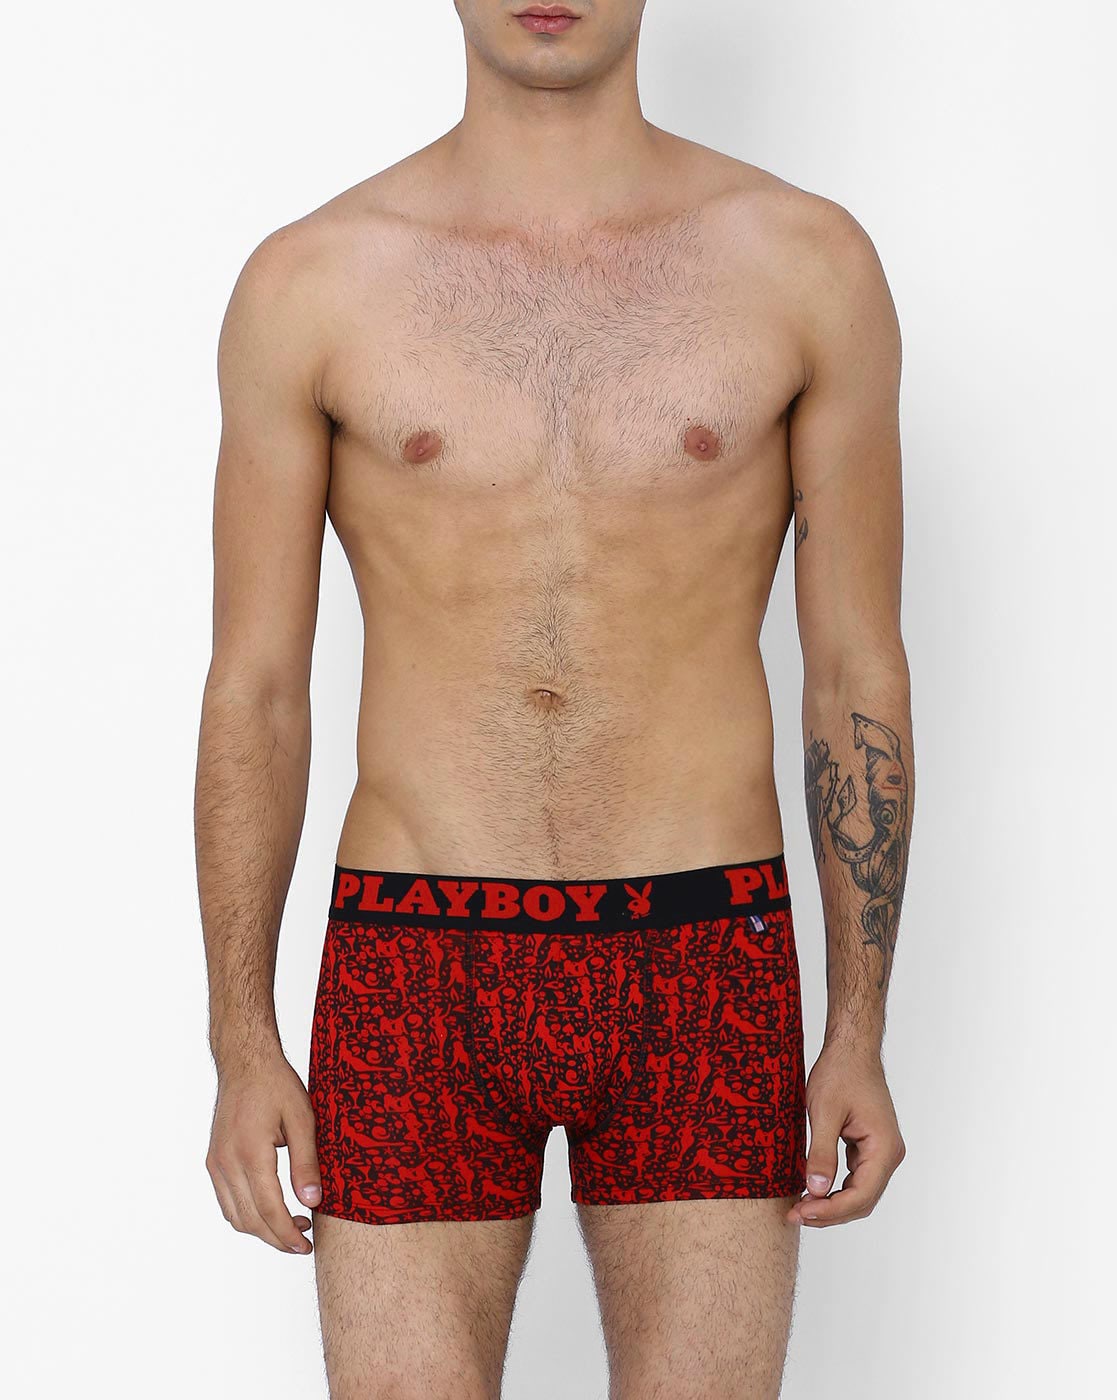 Playboy 3 Pairs Men's Sexy Lycra Classic Underwear Low Rise Trunks